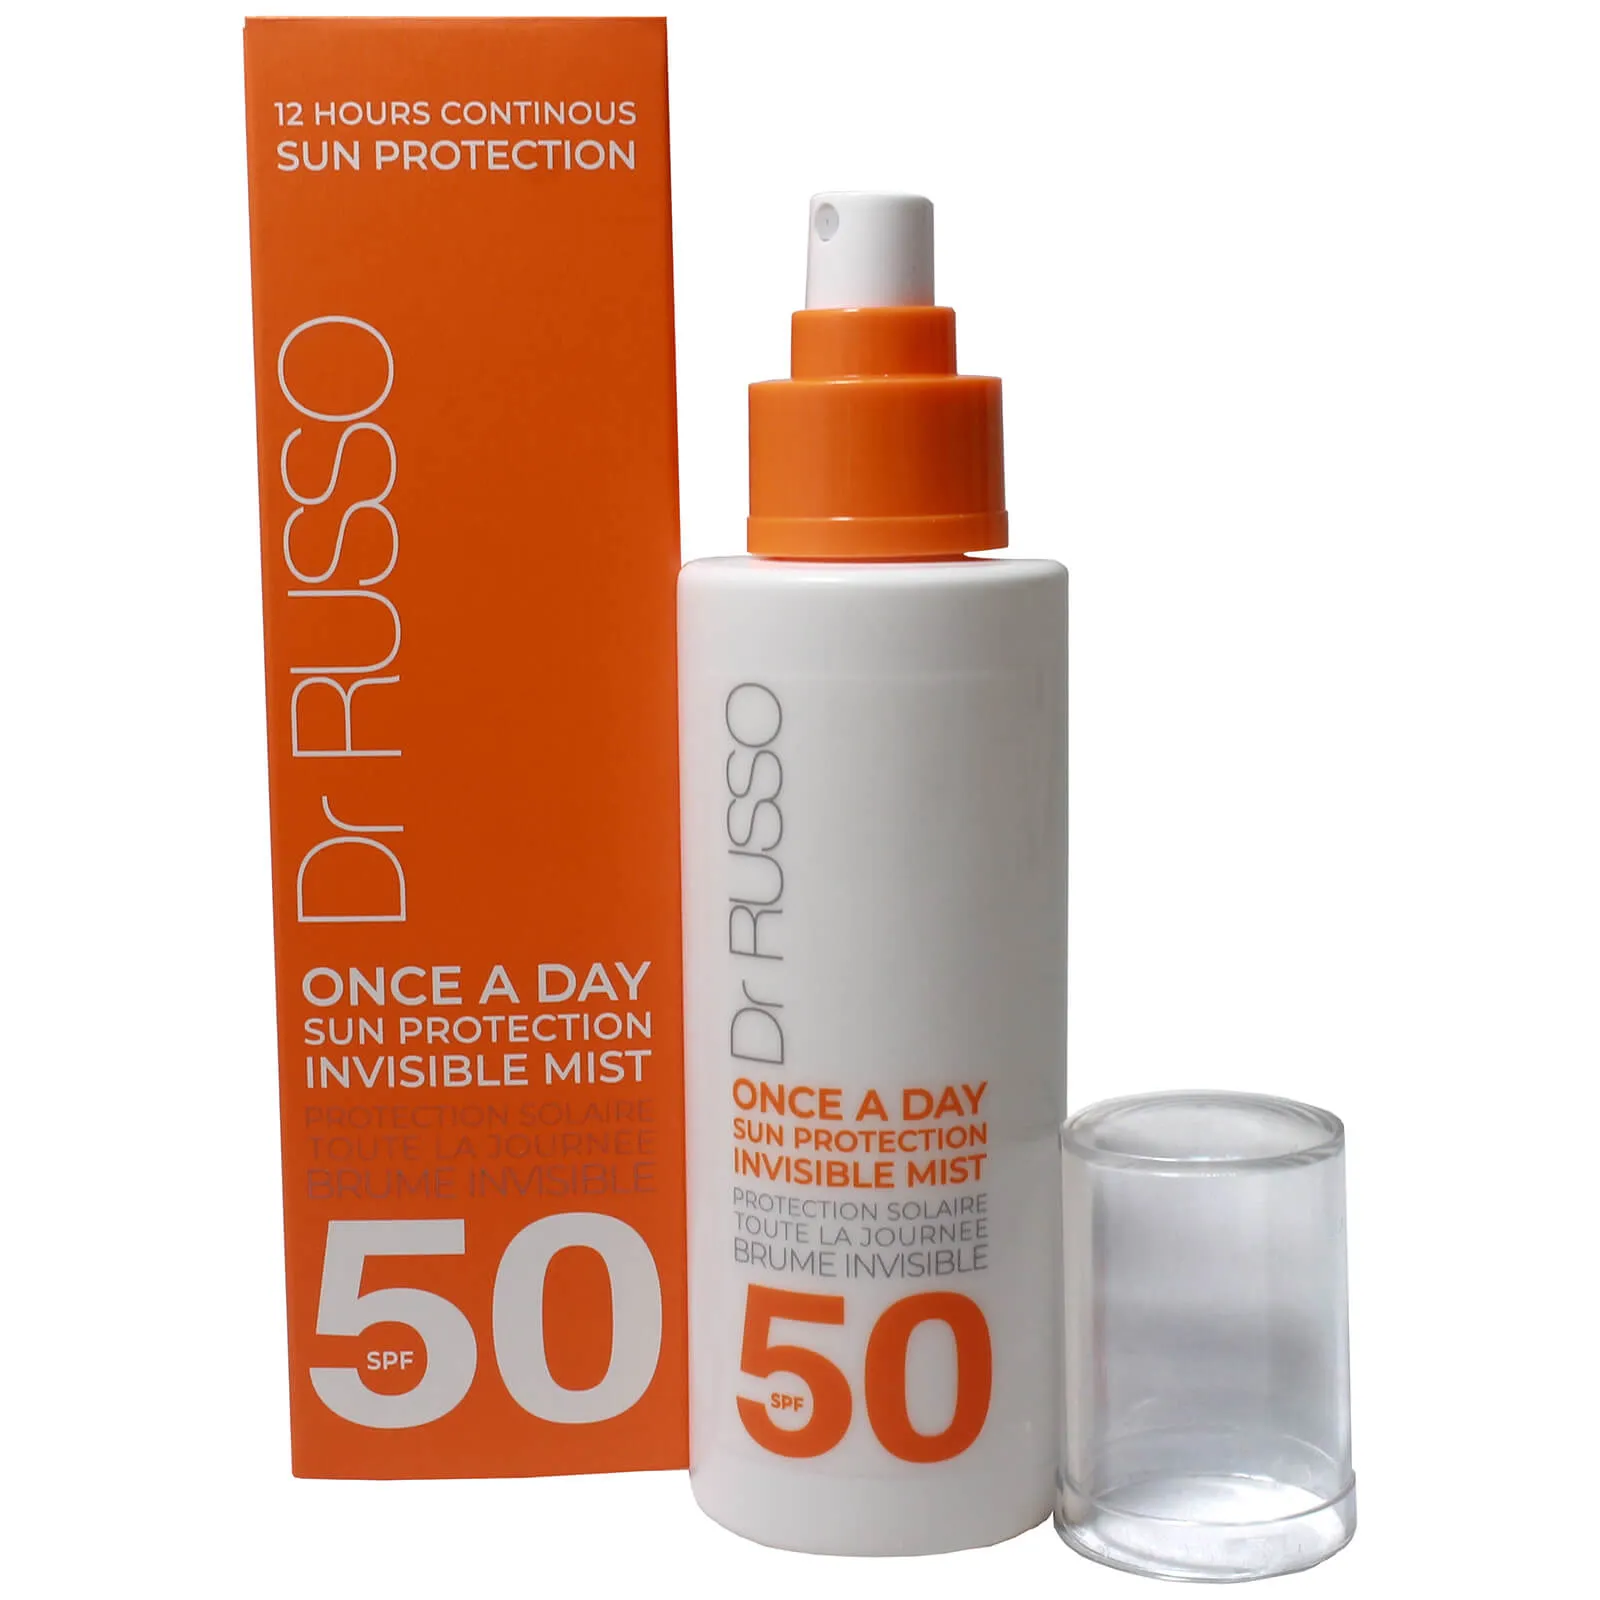  Once a Day SPF50 Sun Protective Invisible Mist 150ml